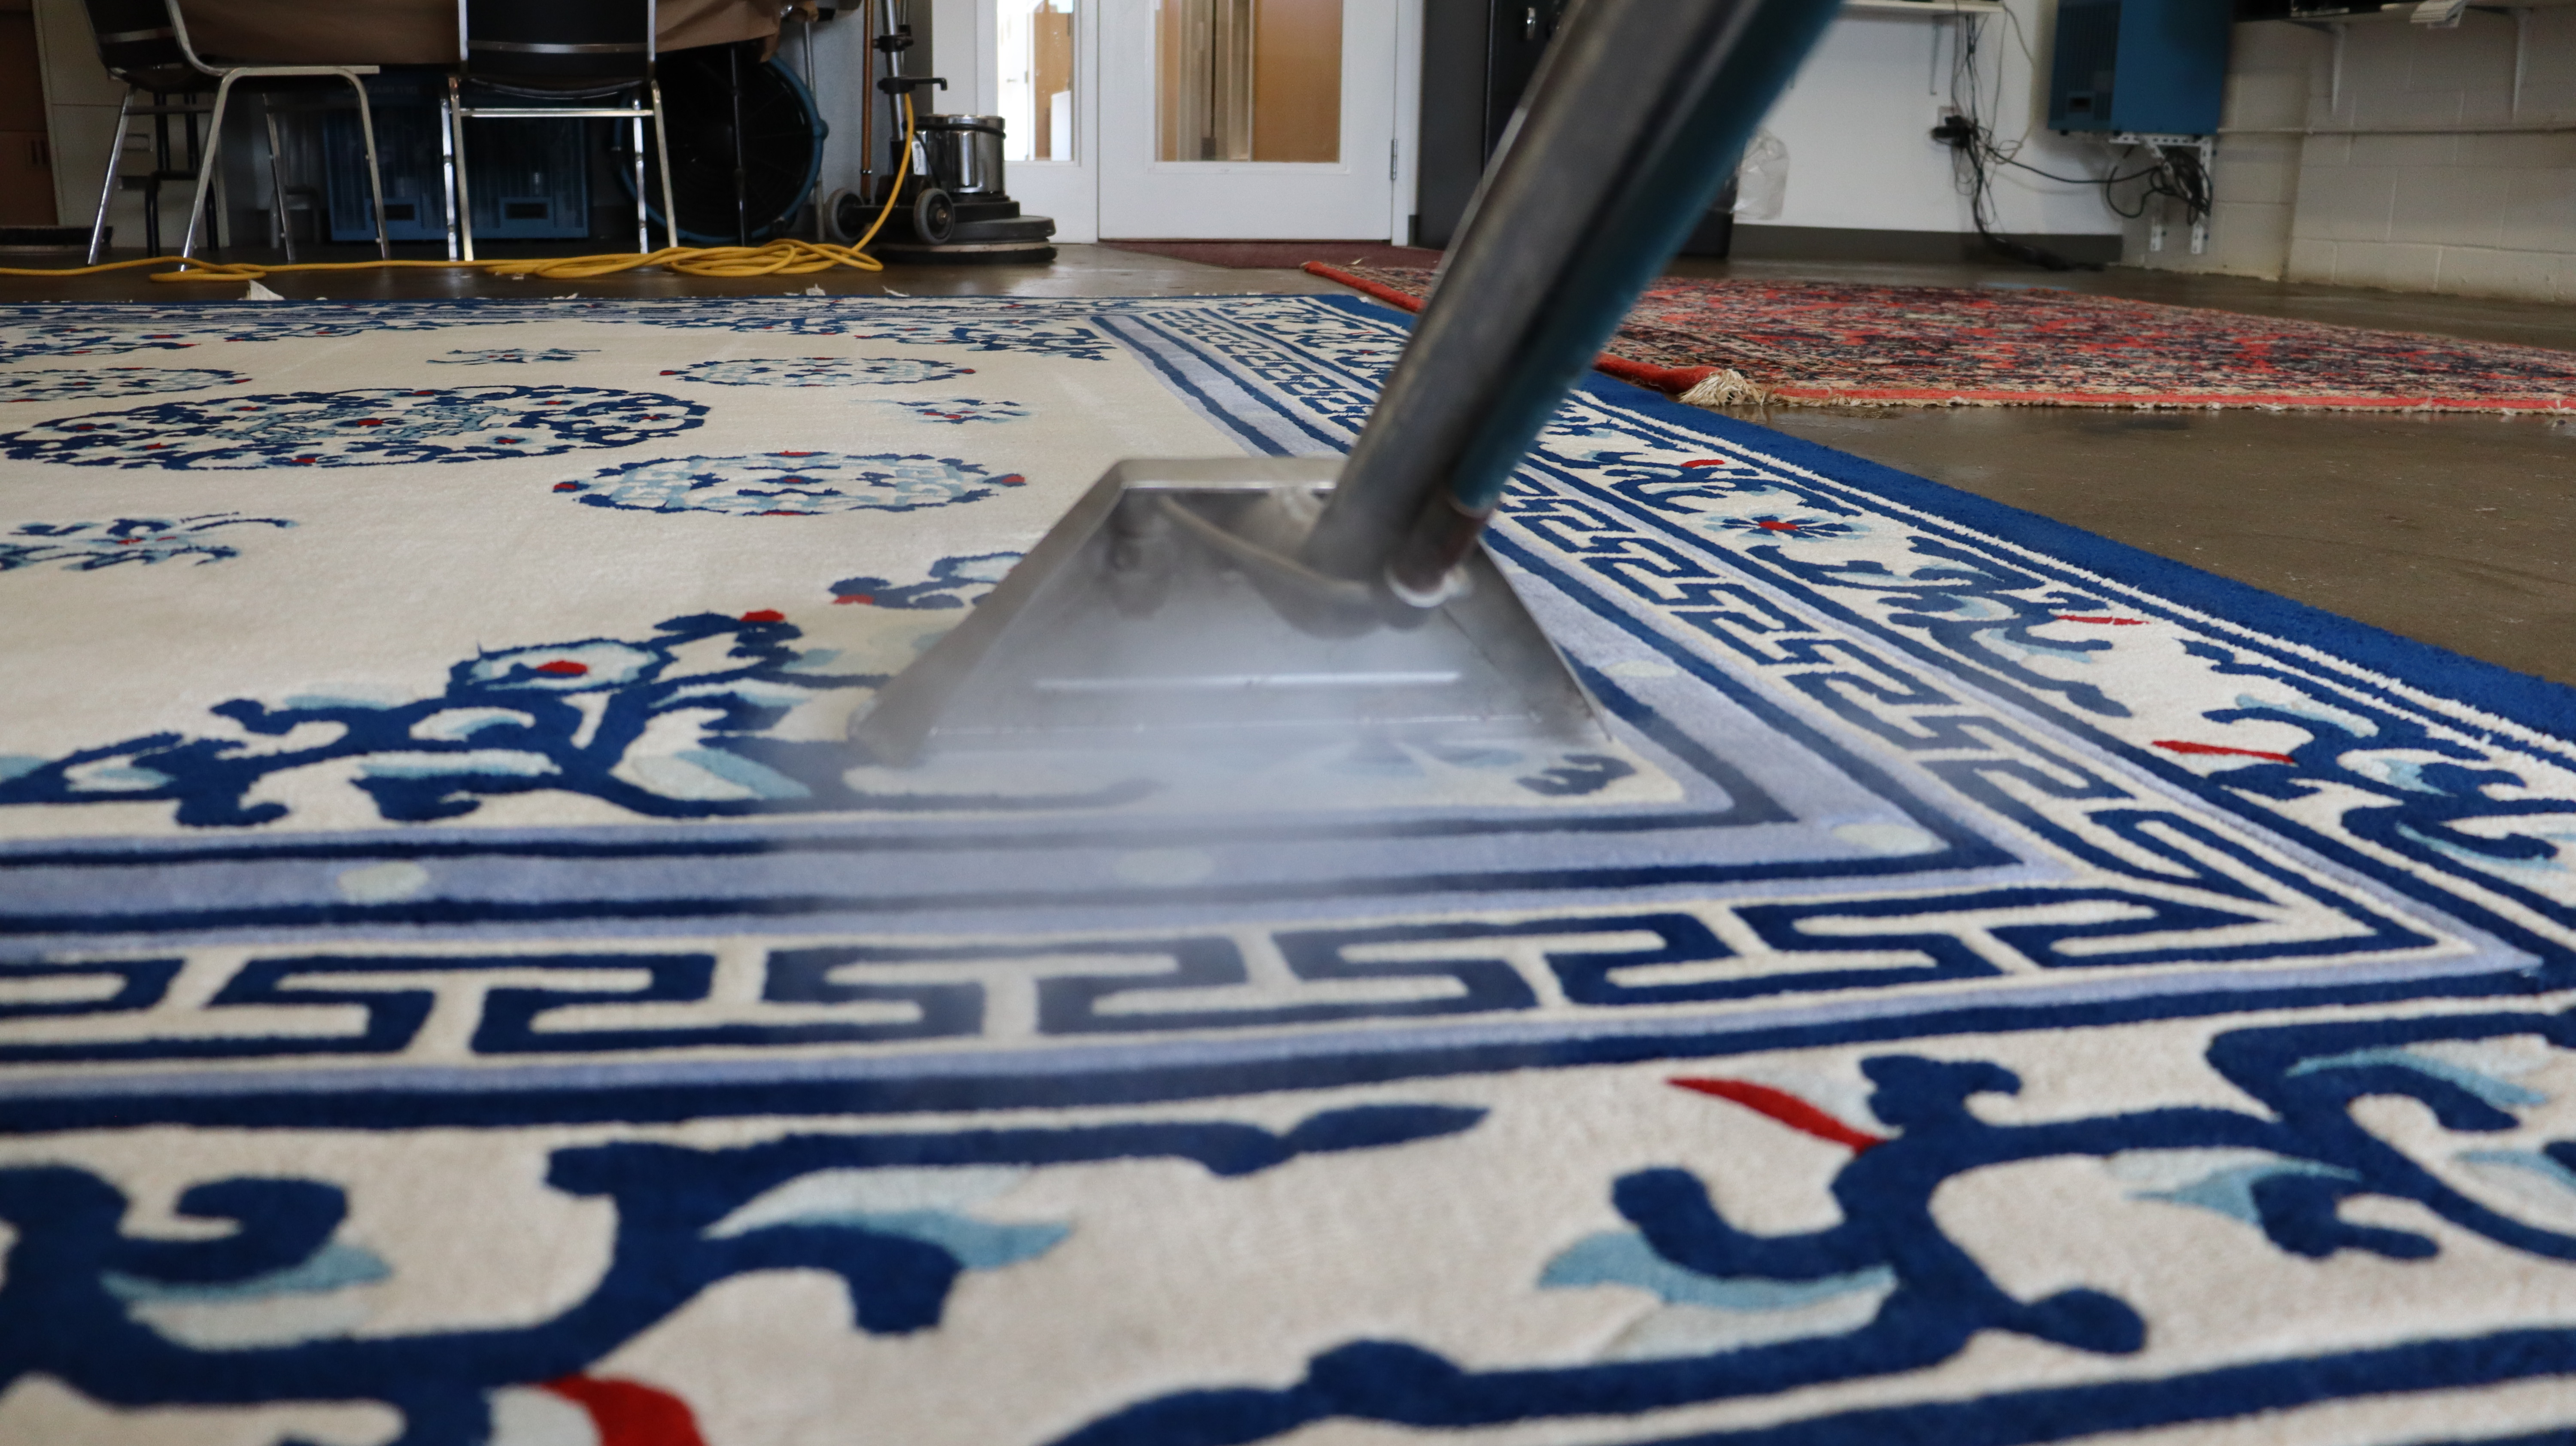 Professional area rug cleaning in whitby, ajax , pickering, oshawa